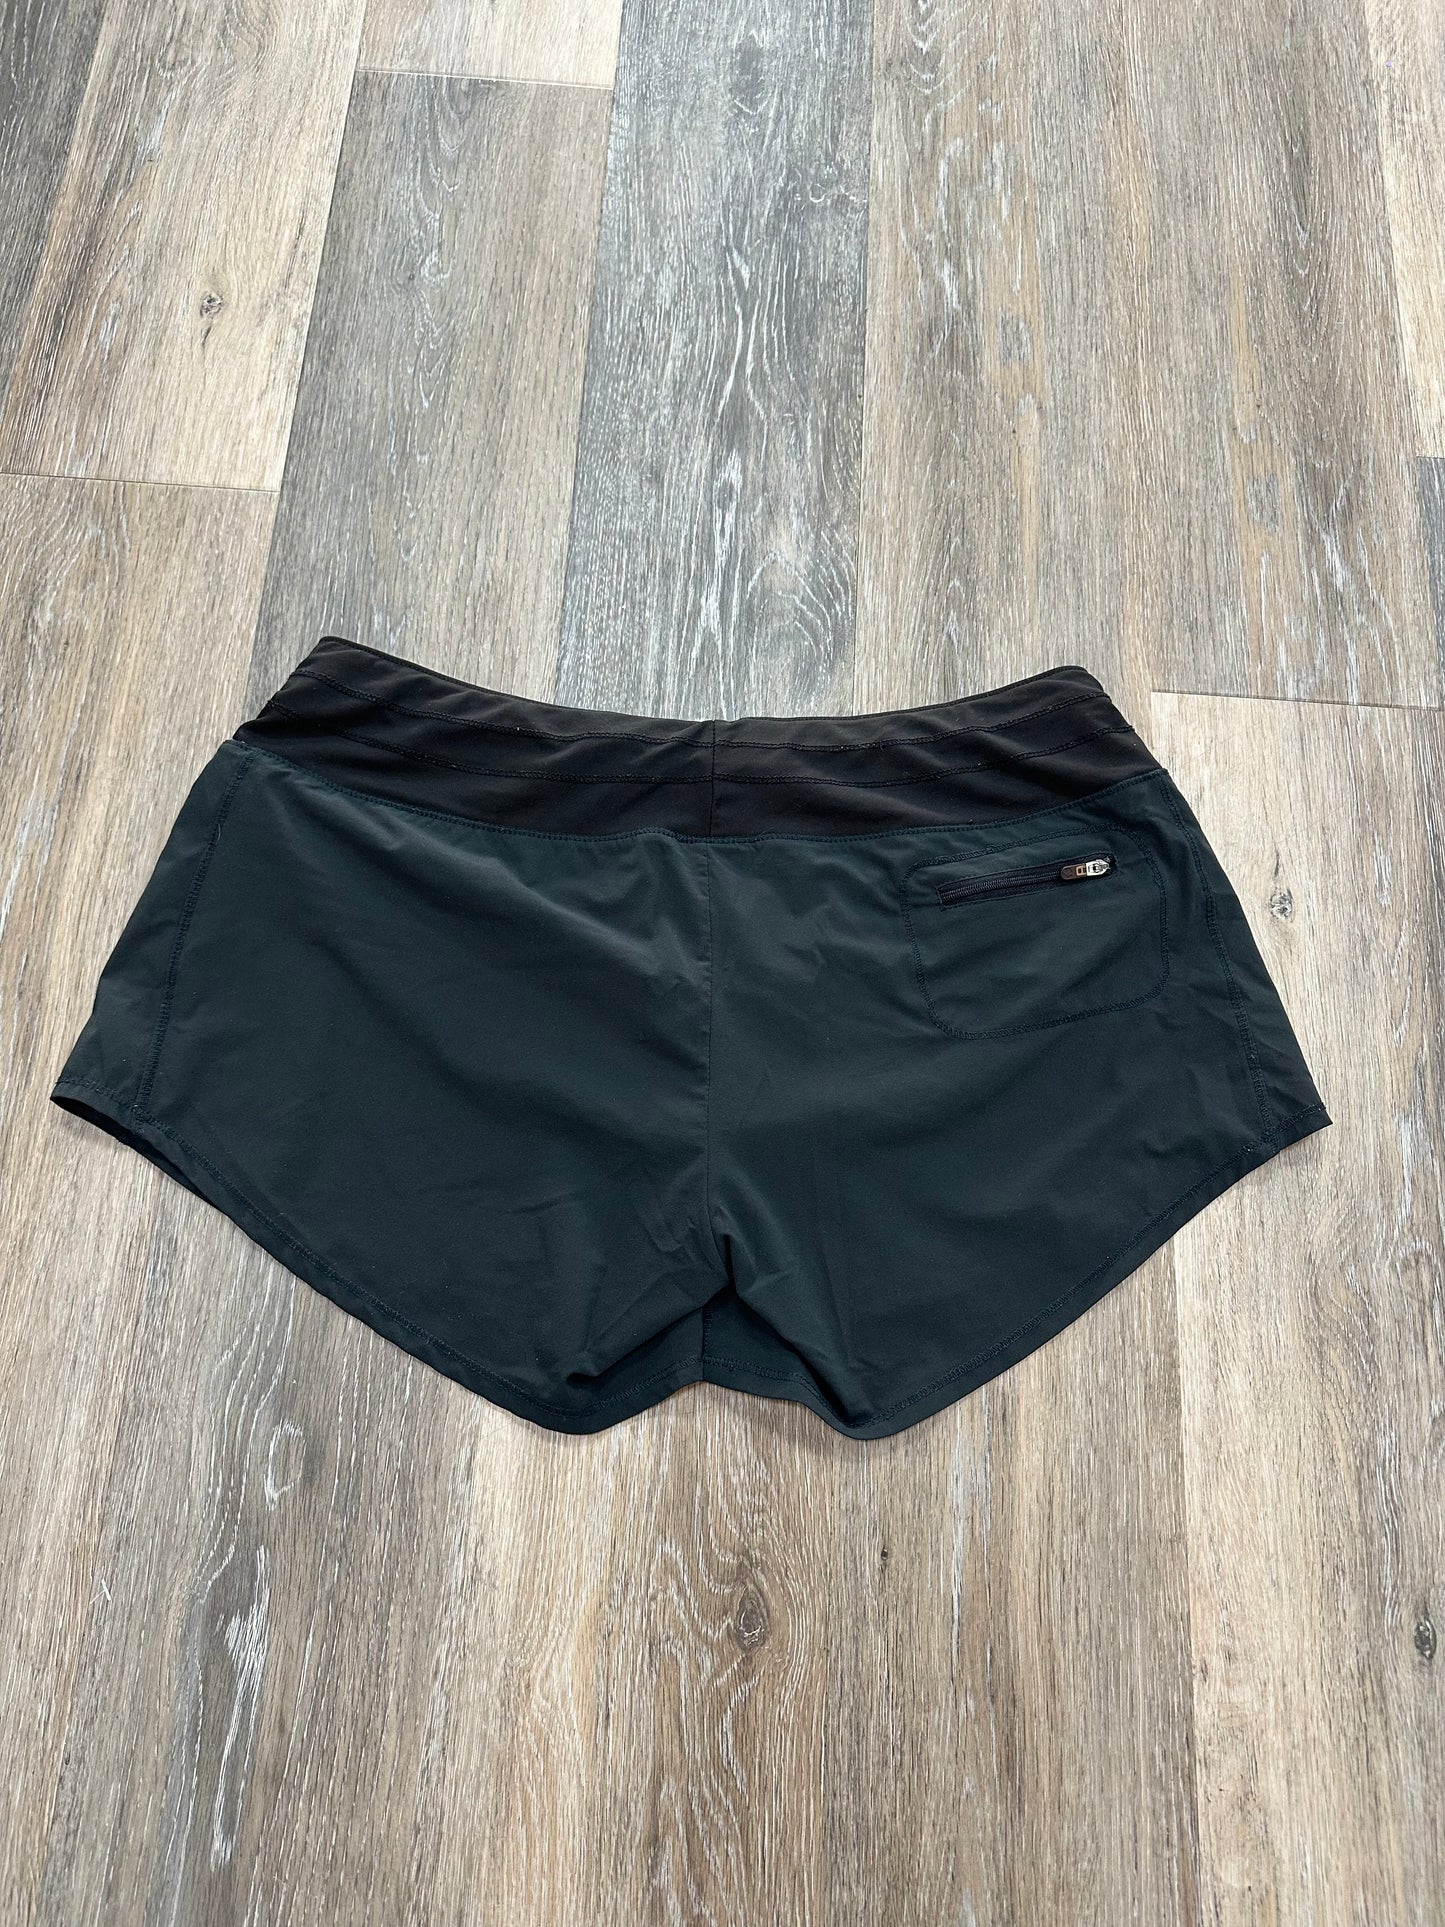 Athletic Shorts By oiselle  Size: 8